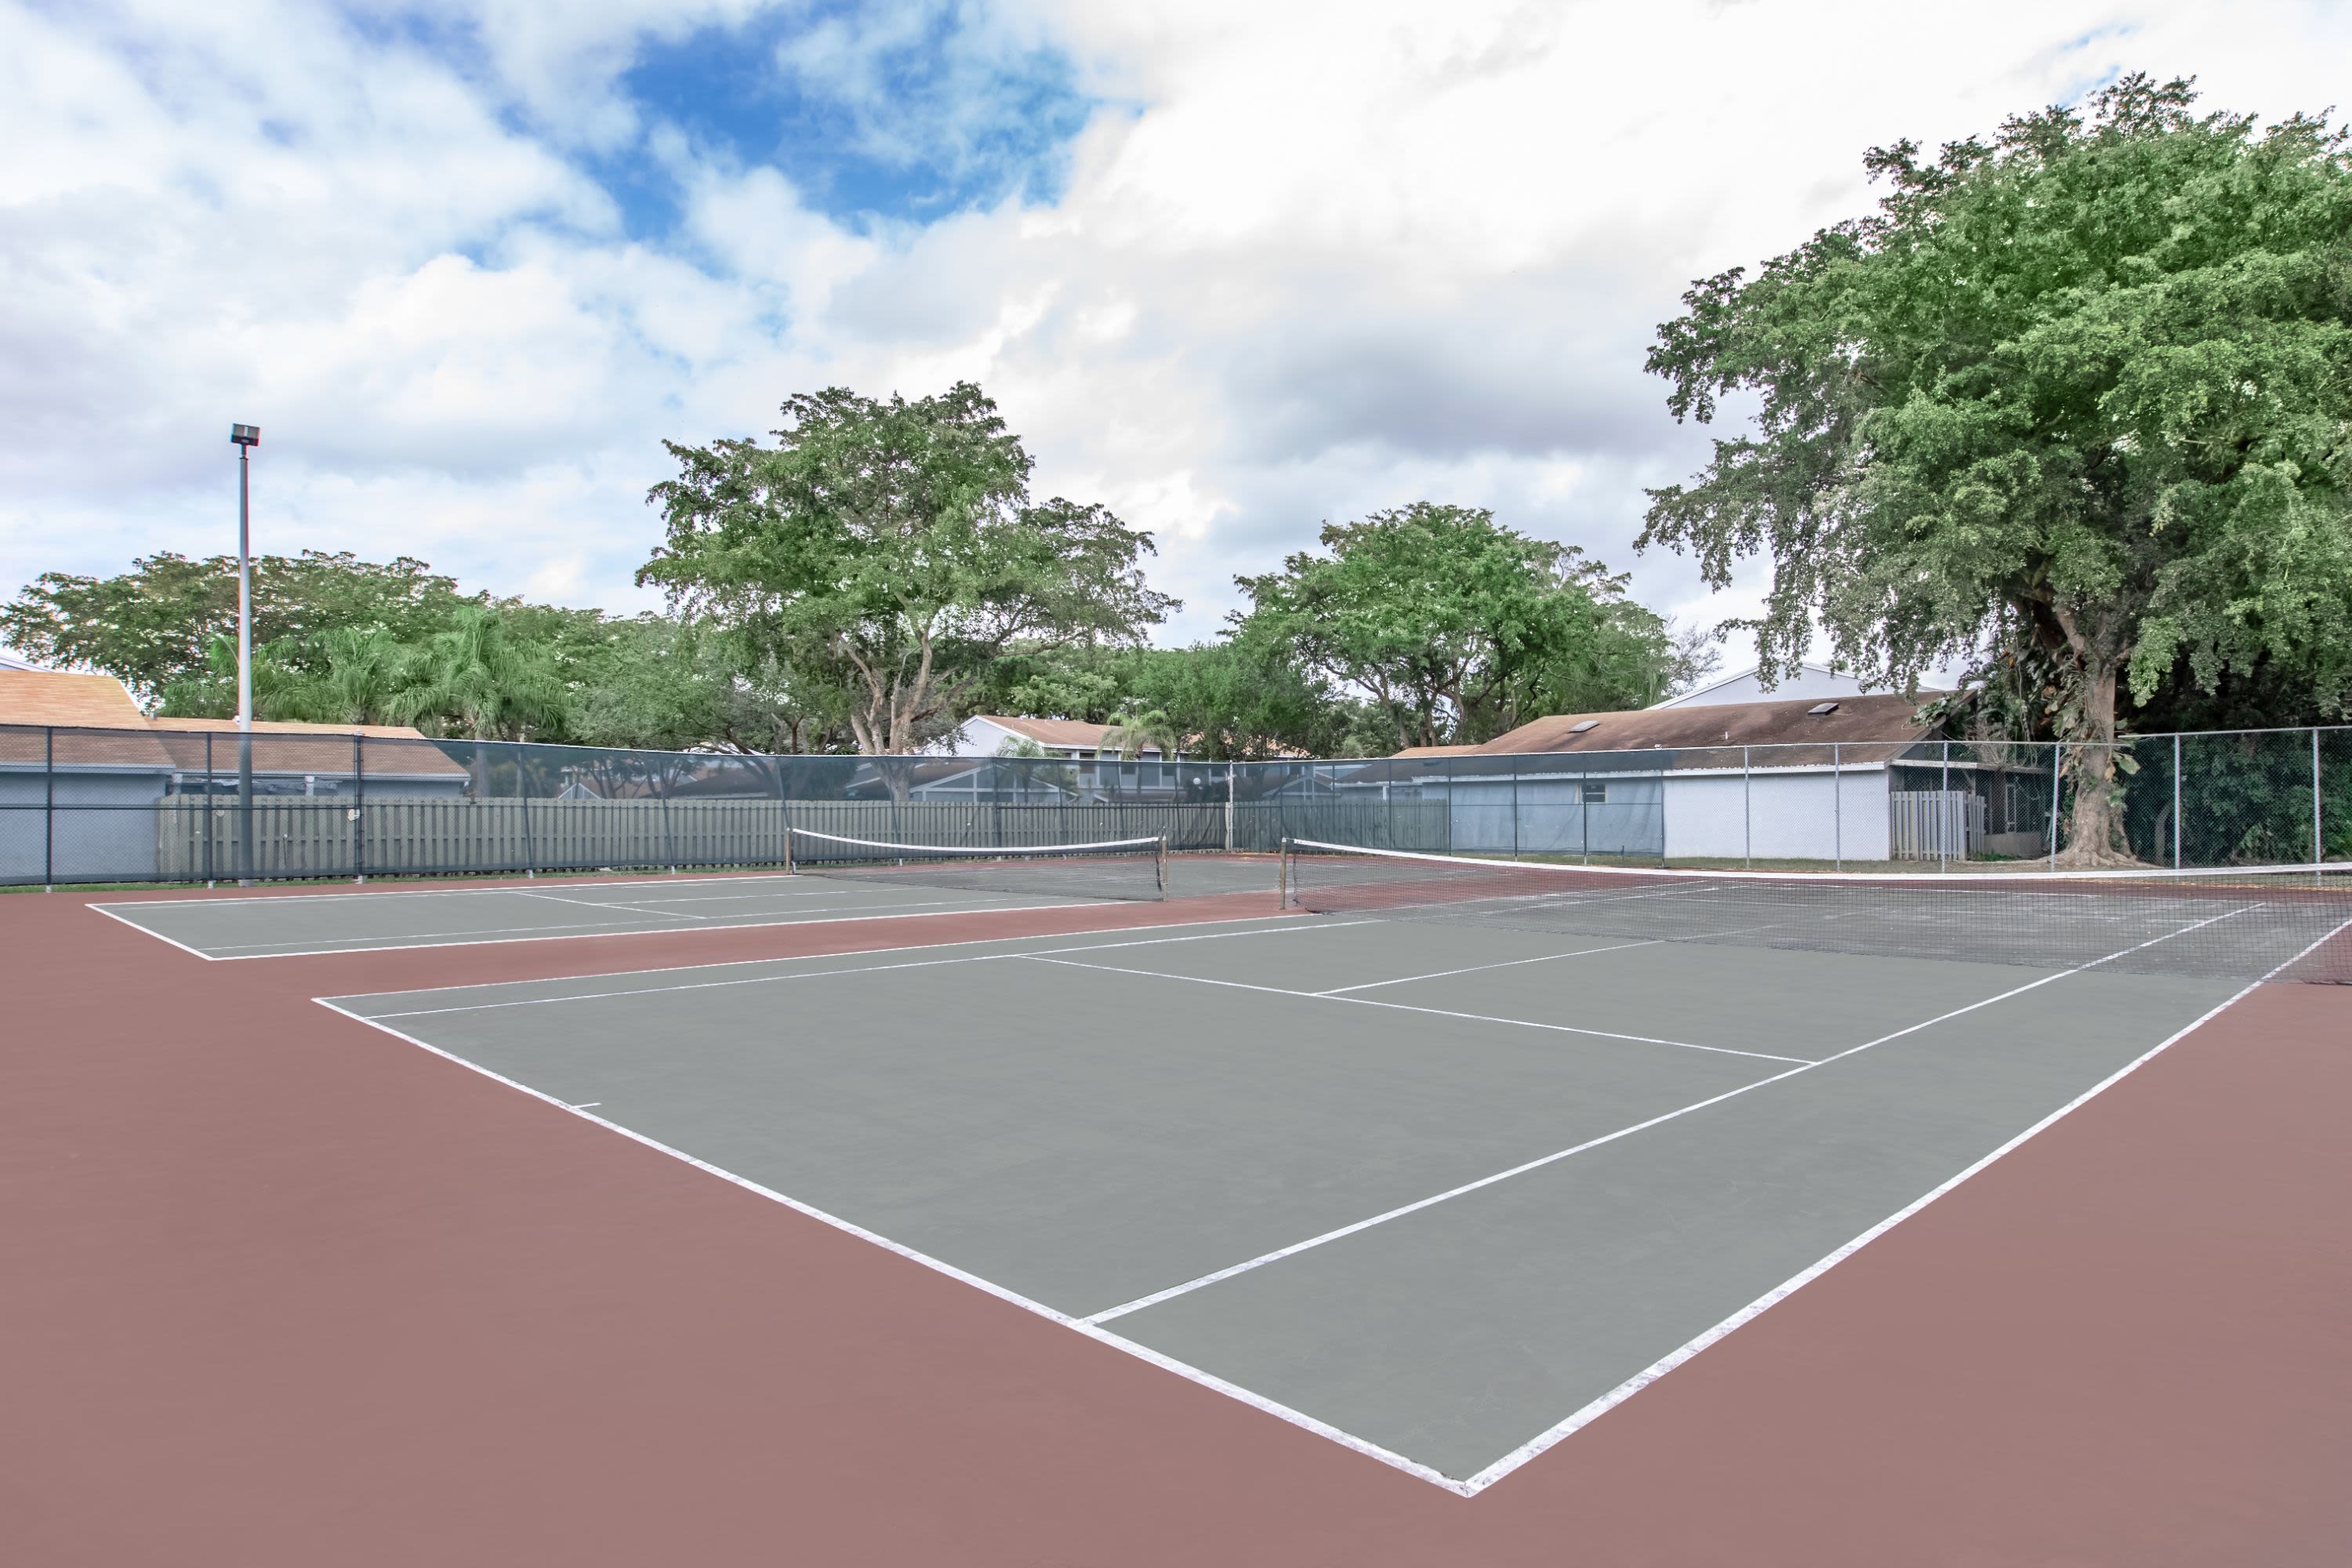 View amenities like our tennis court at Sunrise, Florida